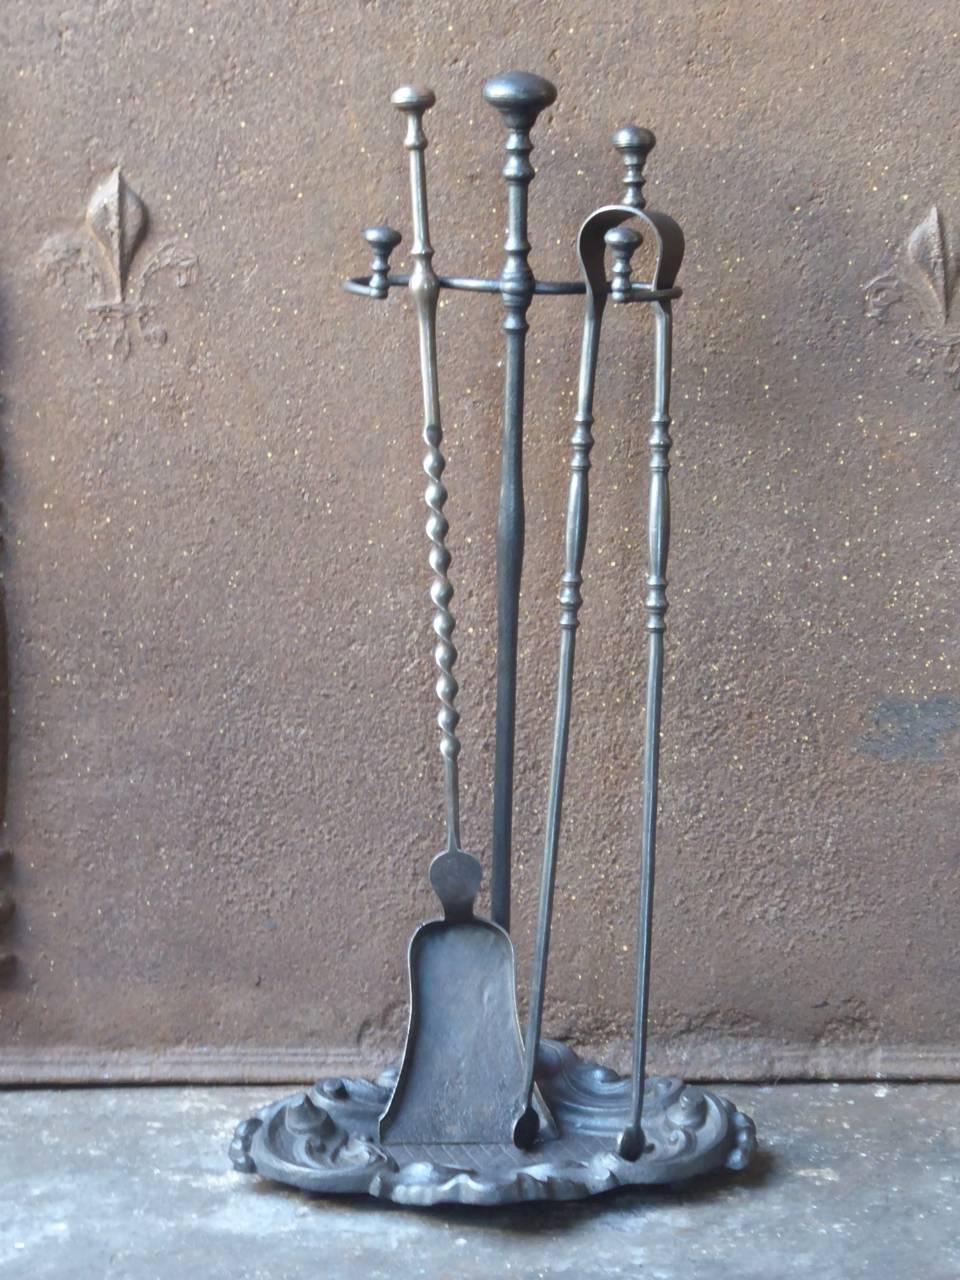 19th century French Napoleon III fireplace tool set, fire irons made of cast iron and wrought iron.

We have a unique and specialized collection of antique and used fireplace accessories consisting of more than 1000 listings at 1stdibs. Amongst